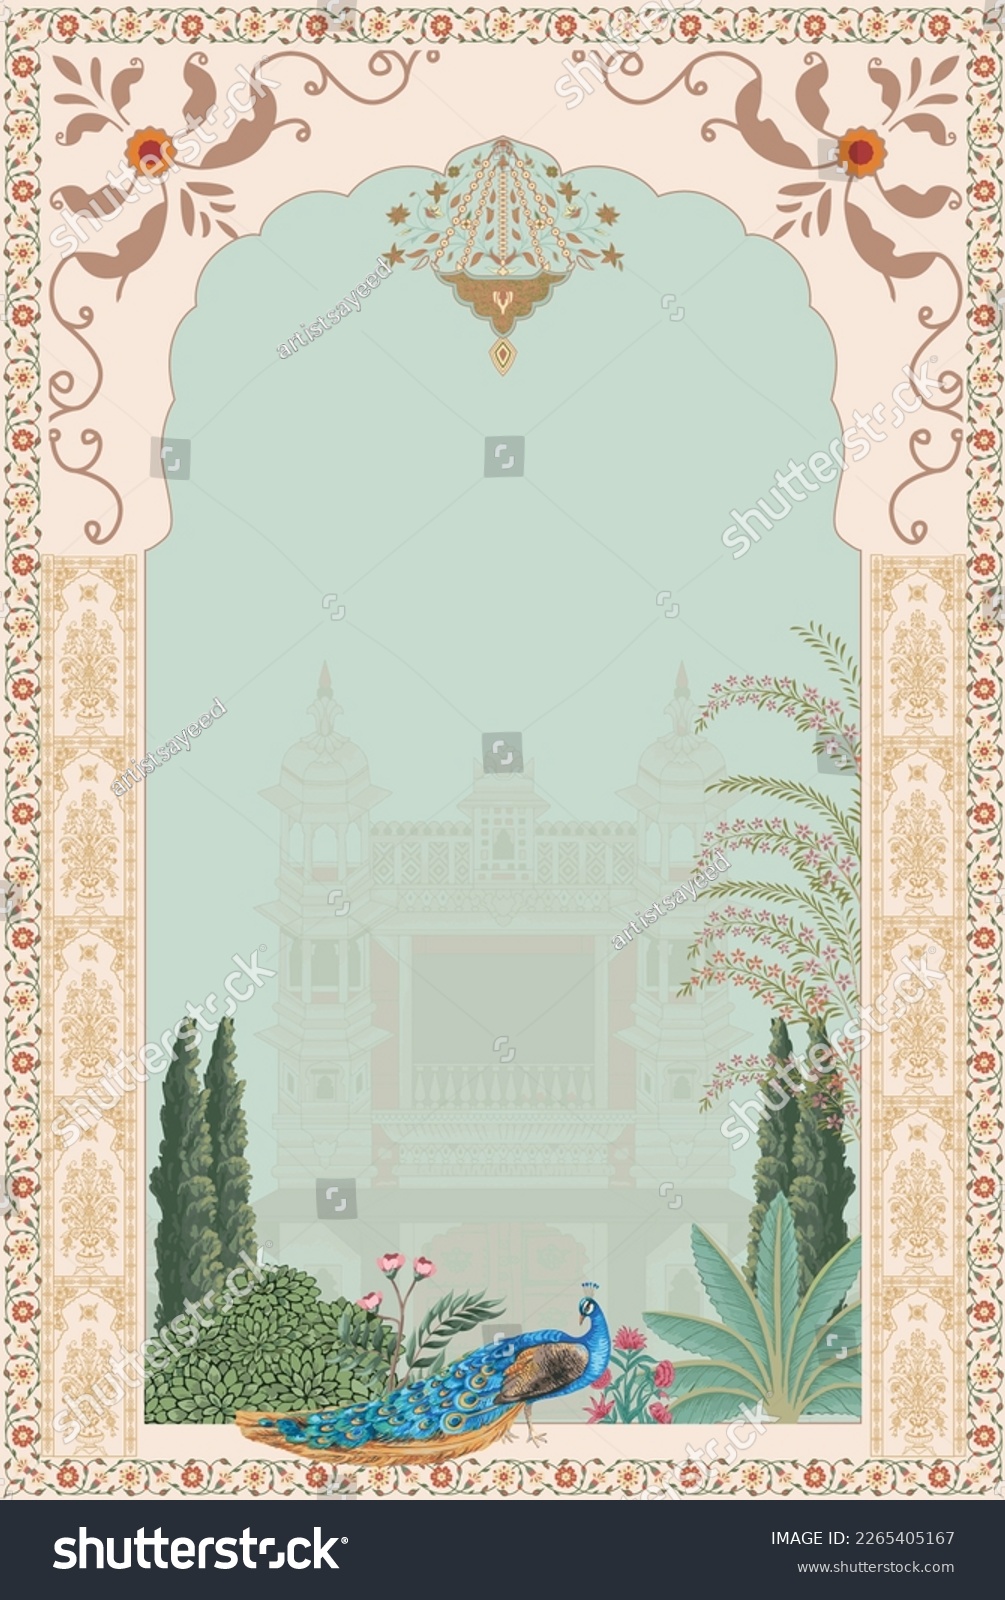 SVG of Traditional Mughal garden arch, plant, peacock illustration for invitation. Vector printable design svg